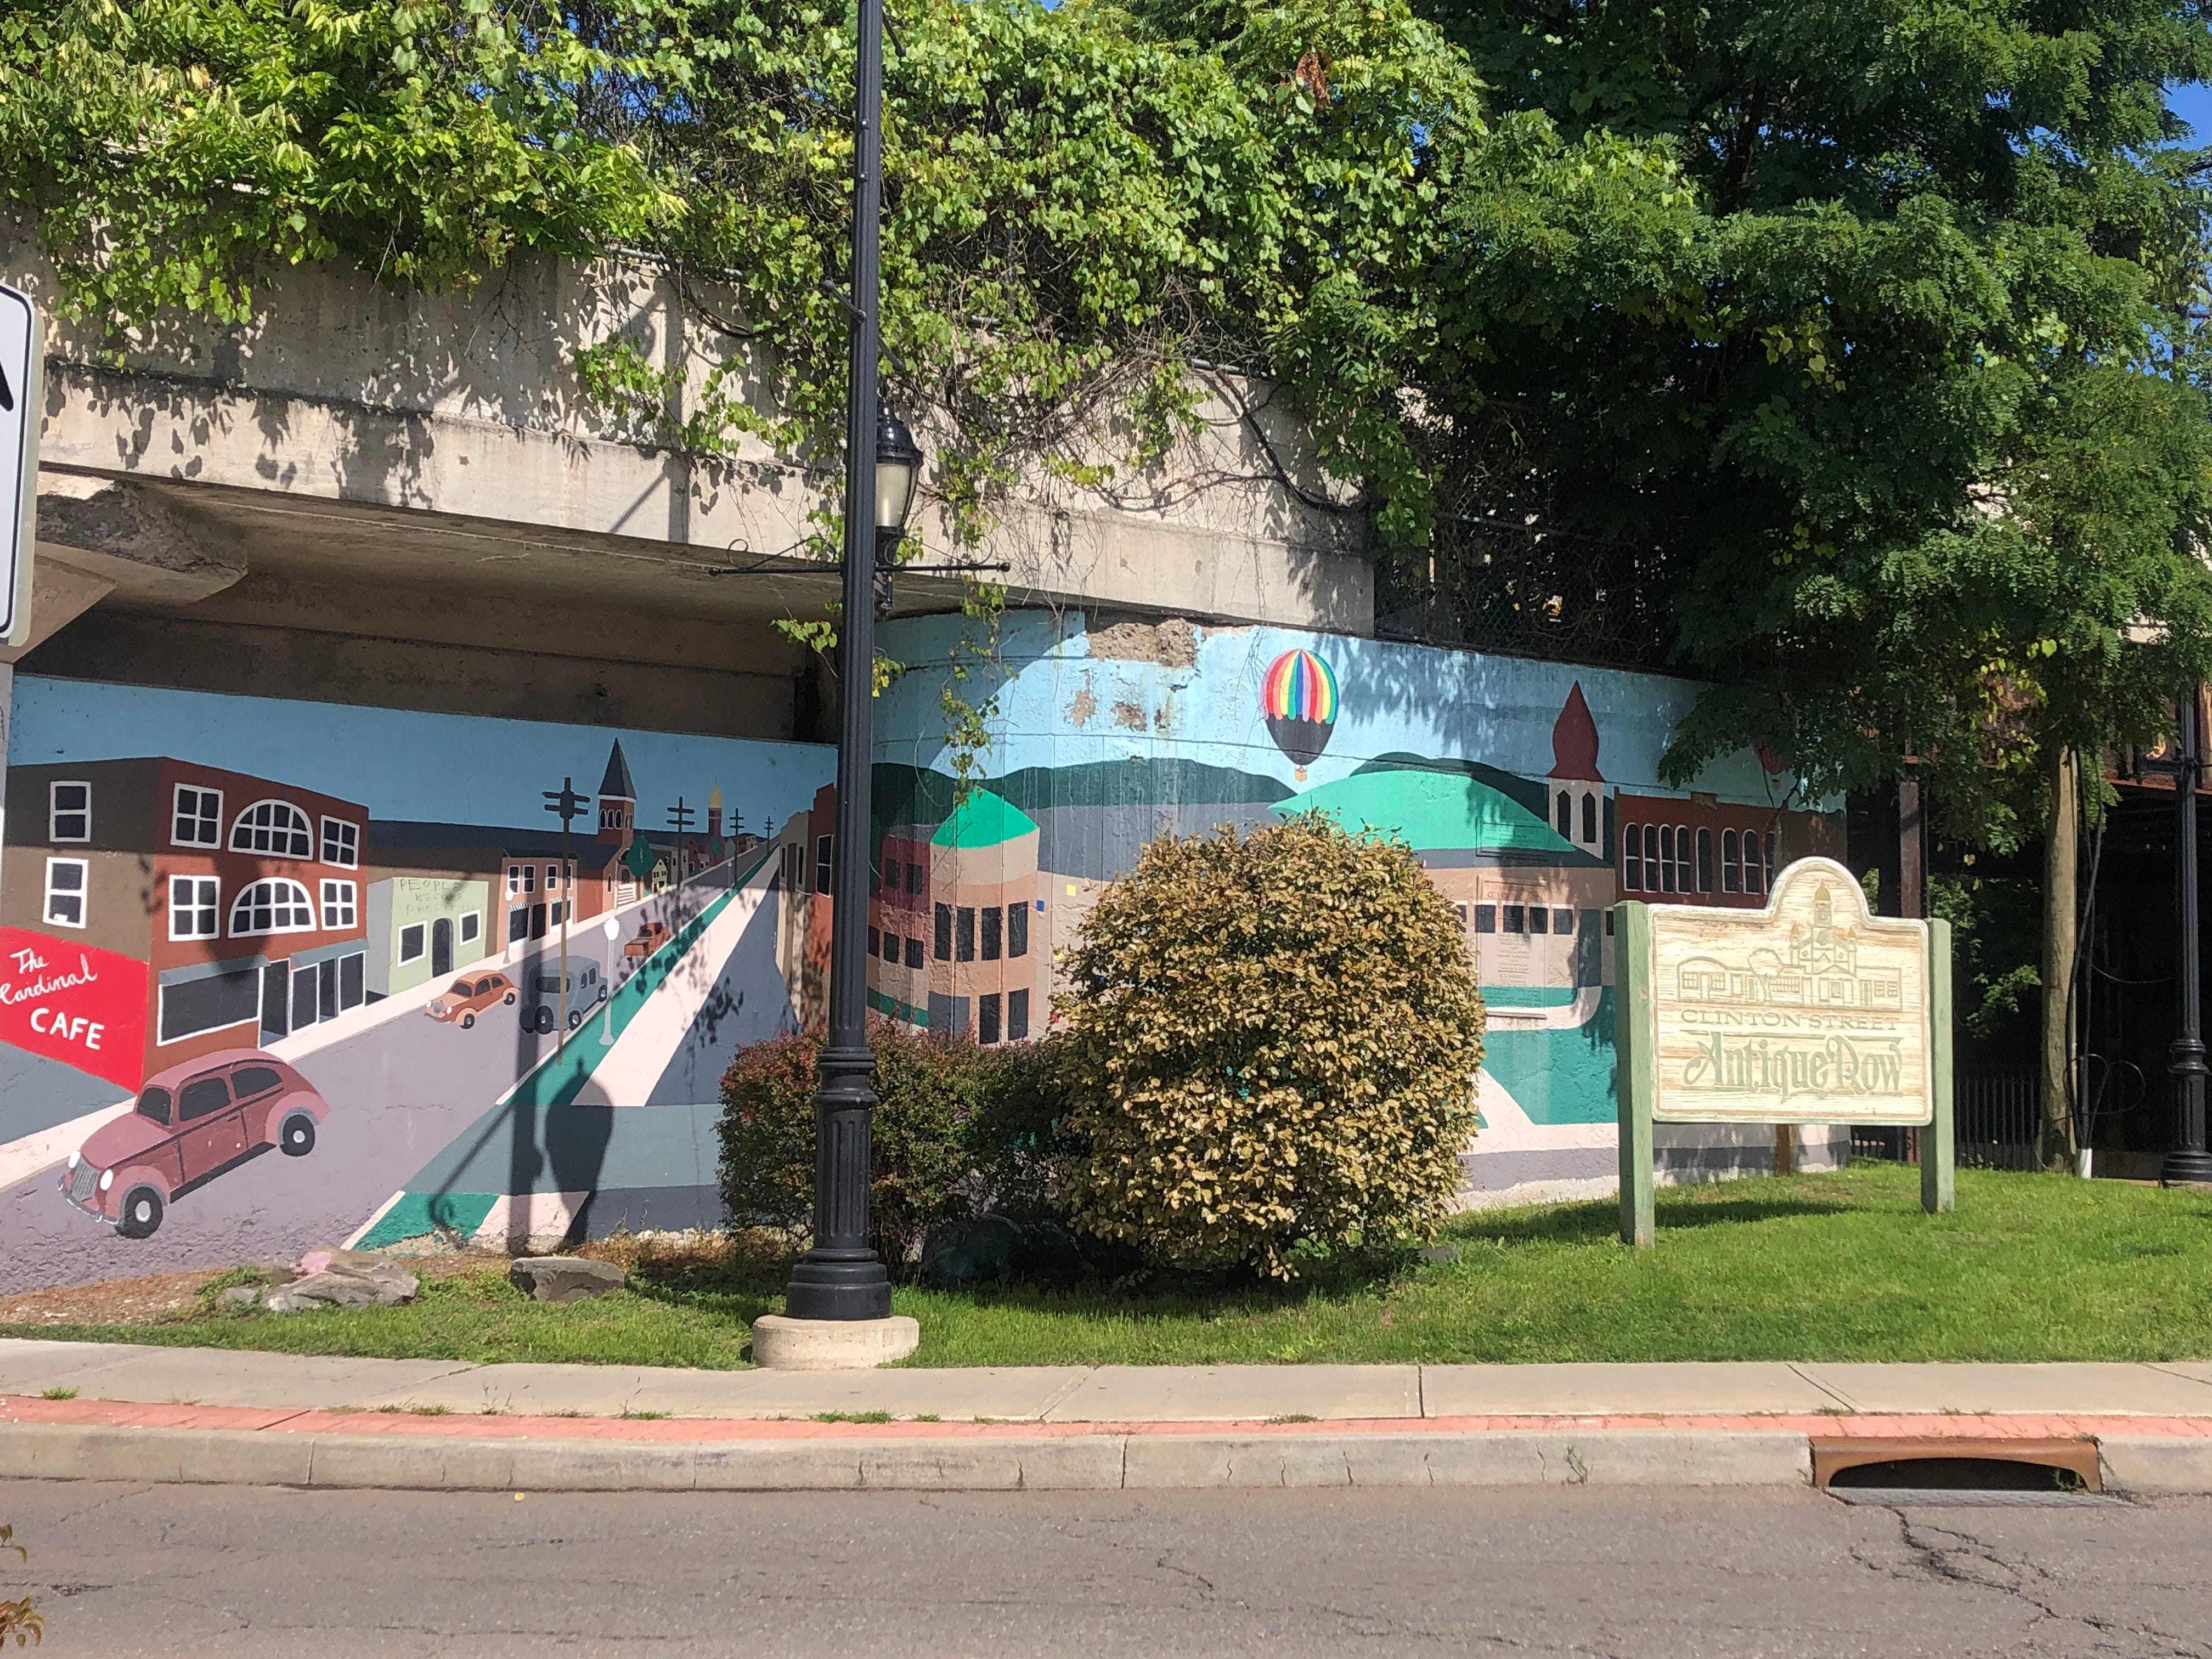 At the intersection of E. Clinton Street and Front Street, a mural depicting familiar buildings and hot air balloons welcomes people to the Clinton Street Antique Row.